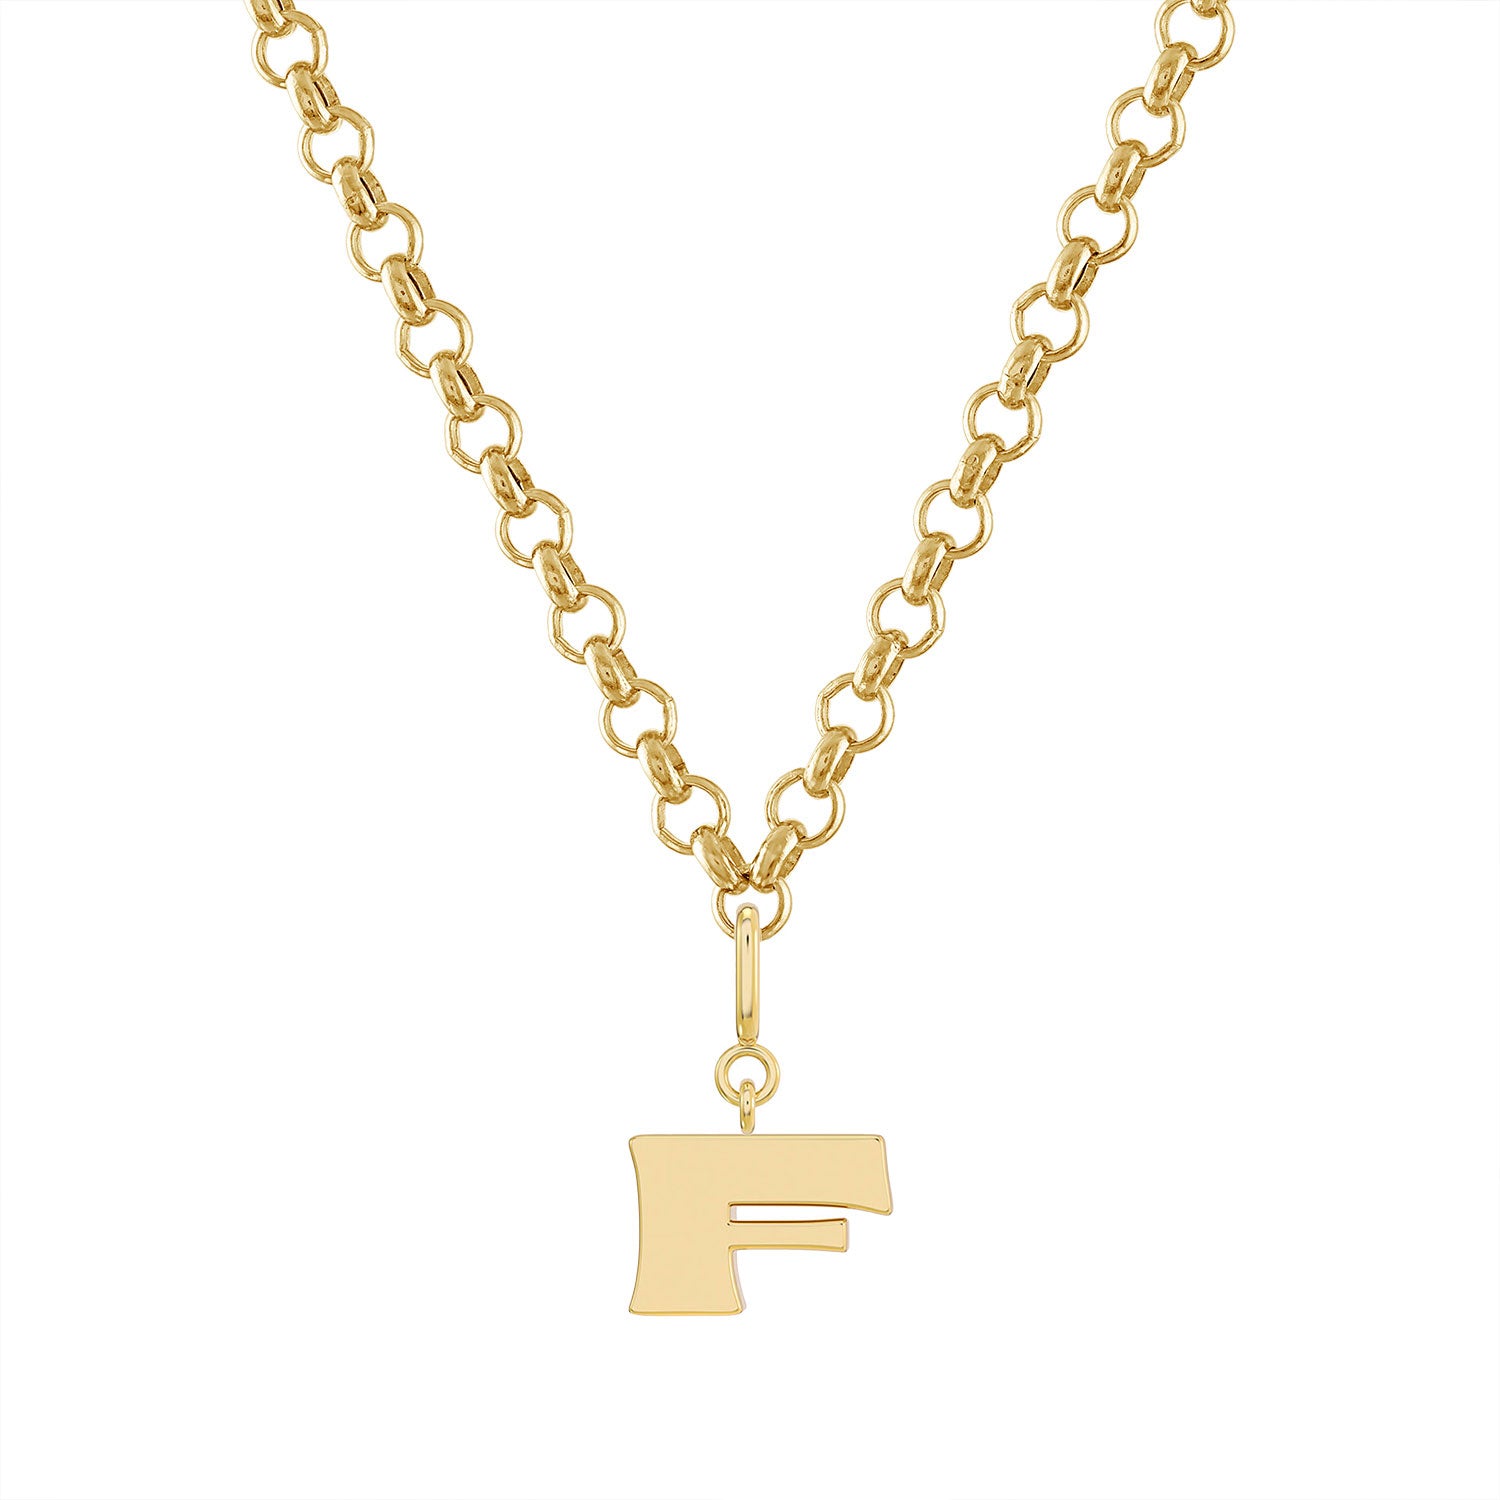 More is More Gold Letter Pendant